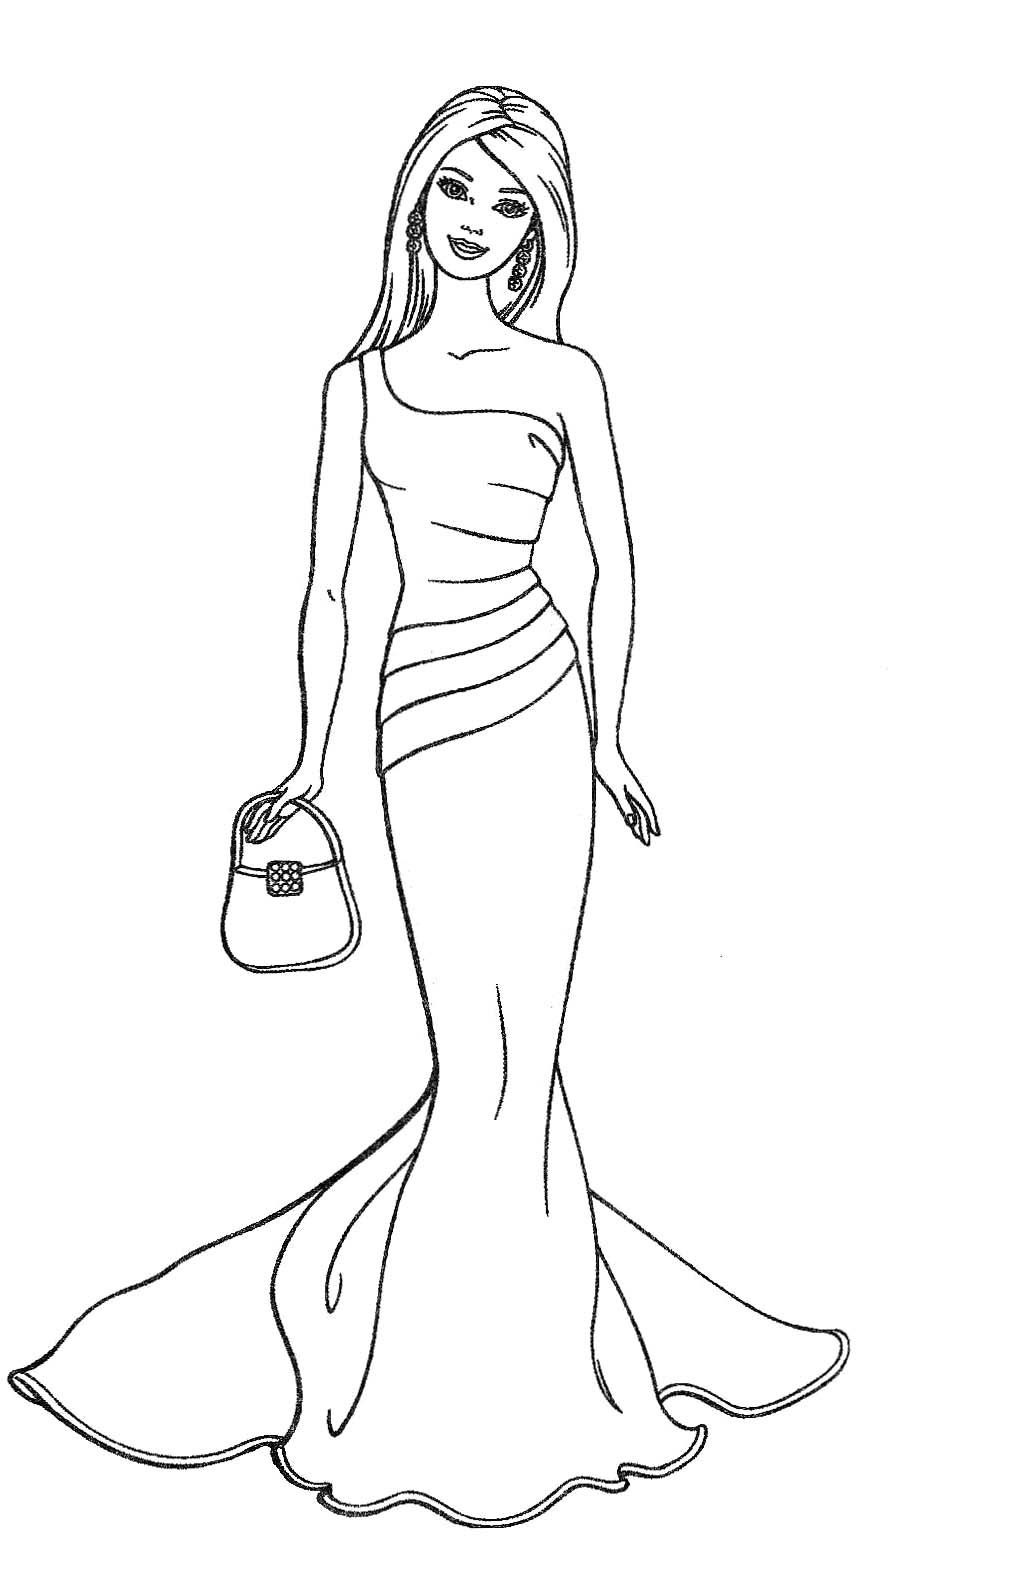 Barbie Doll Coloring Pages
 Barbie Coloring Pages Printable To Download